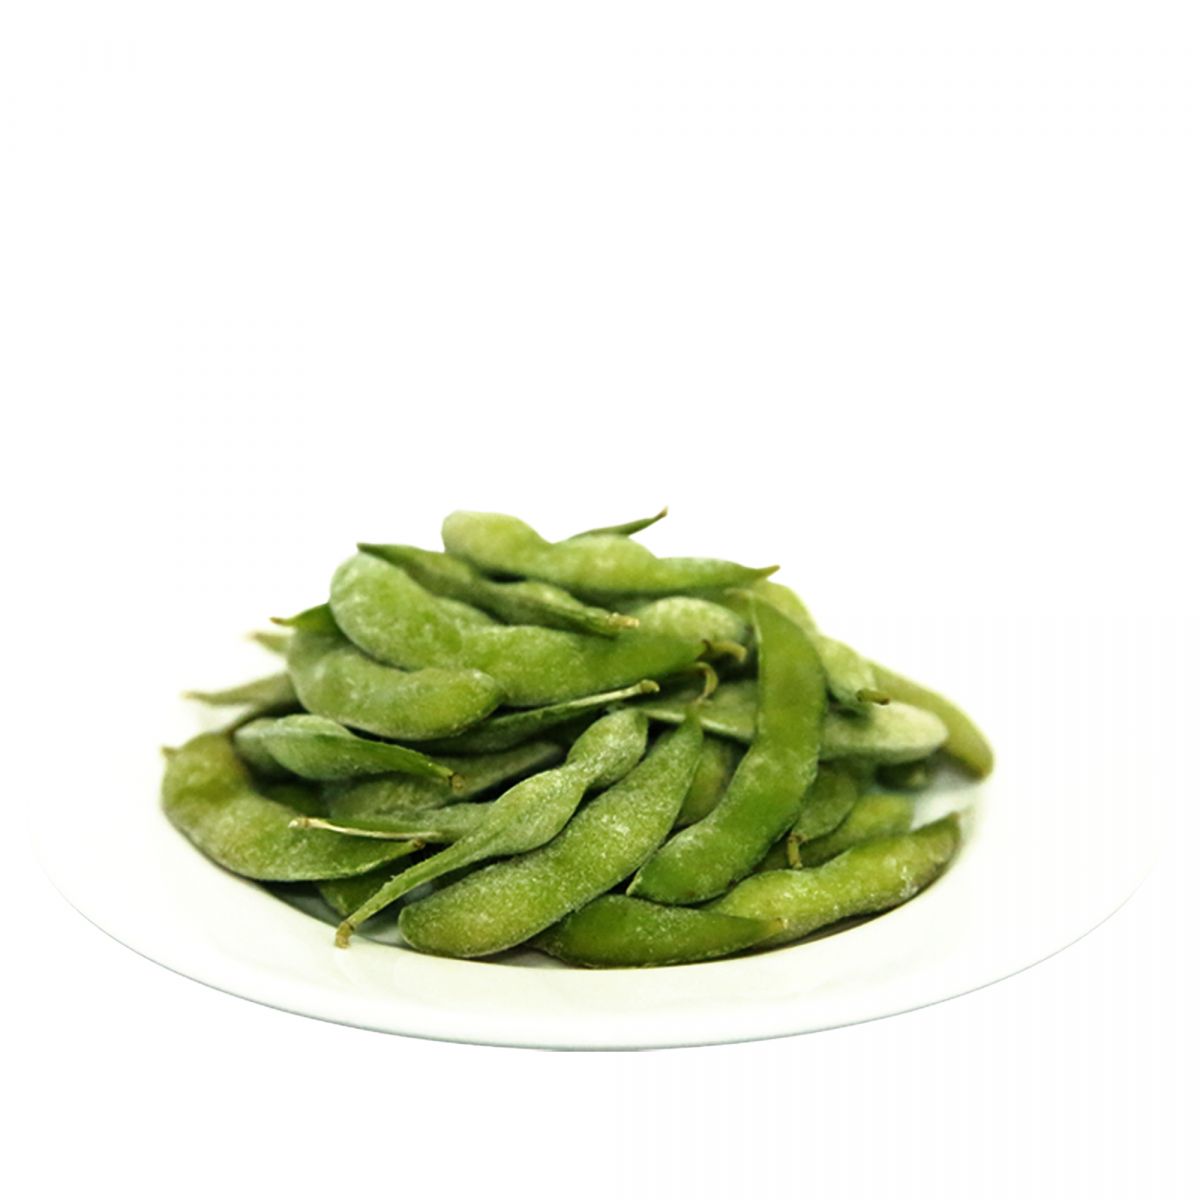 https://www.lavifood.com/en/products/blanching/edamame-beans